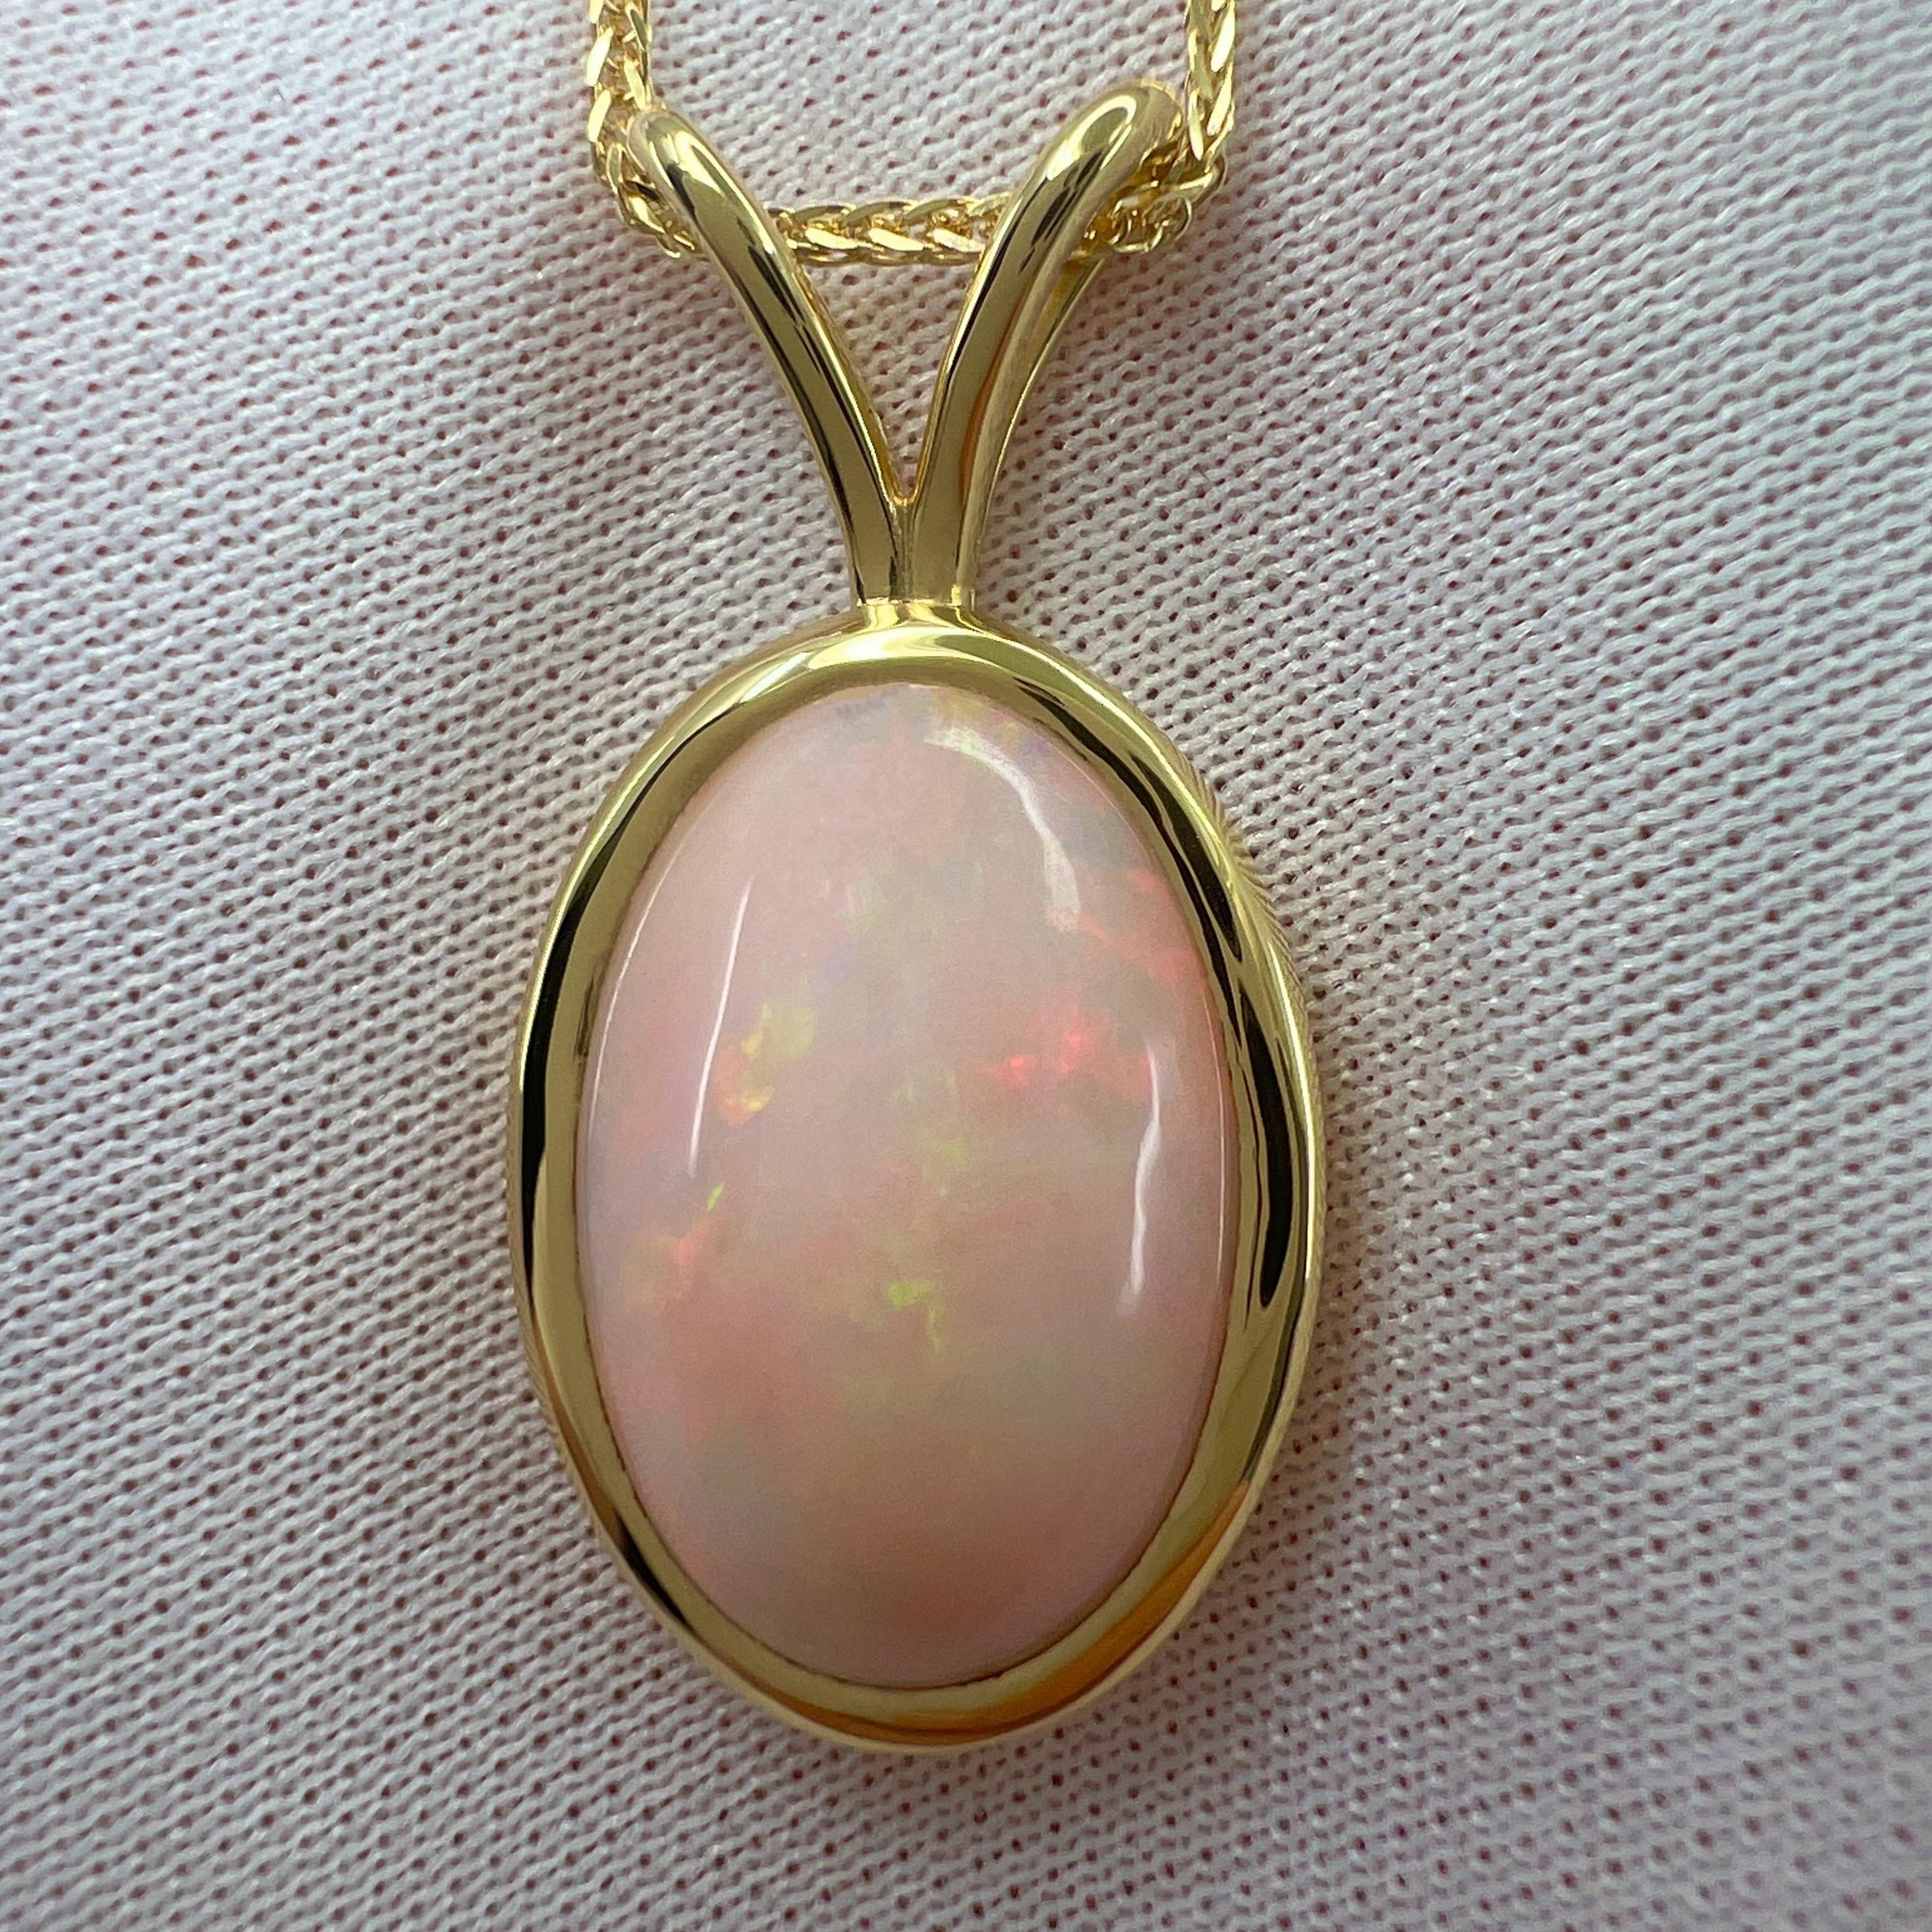 6.15ct Fine White Opal Oval Cabochon 18k Yellow Gold Bezel Pendant Necklace For Sale 5